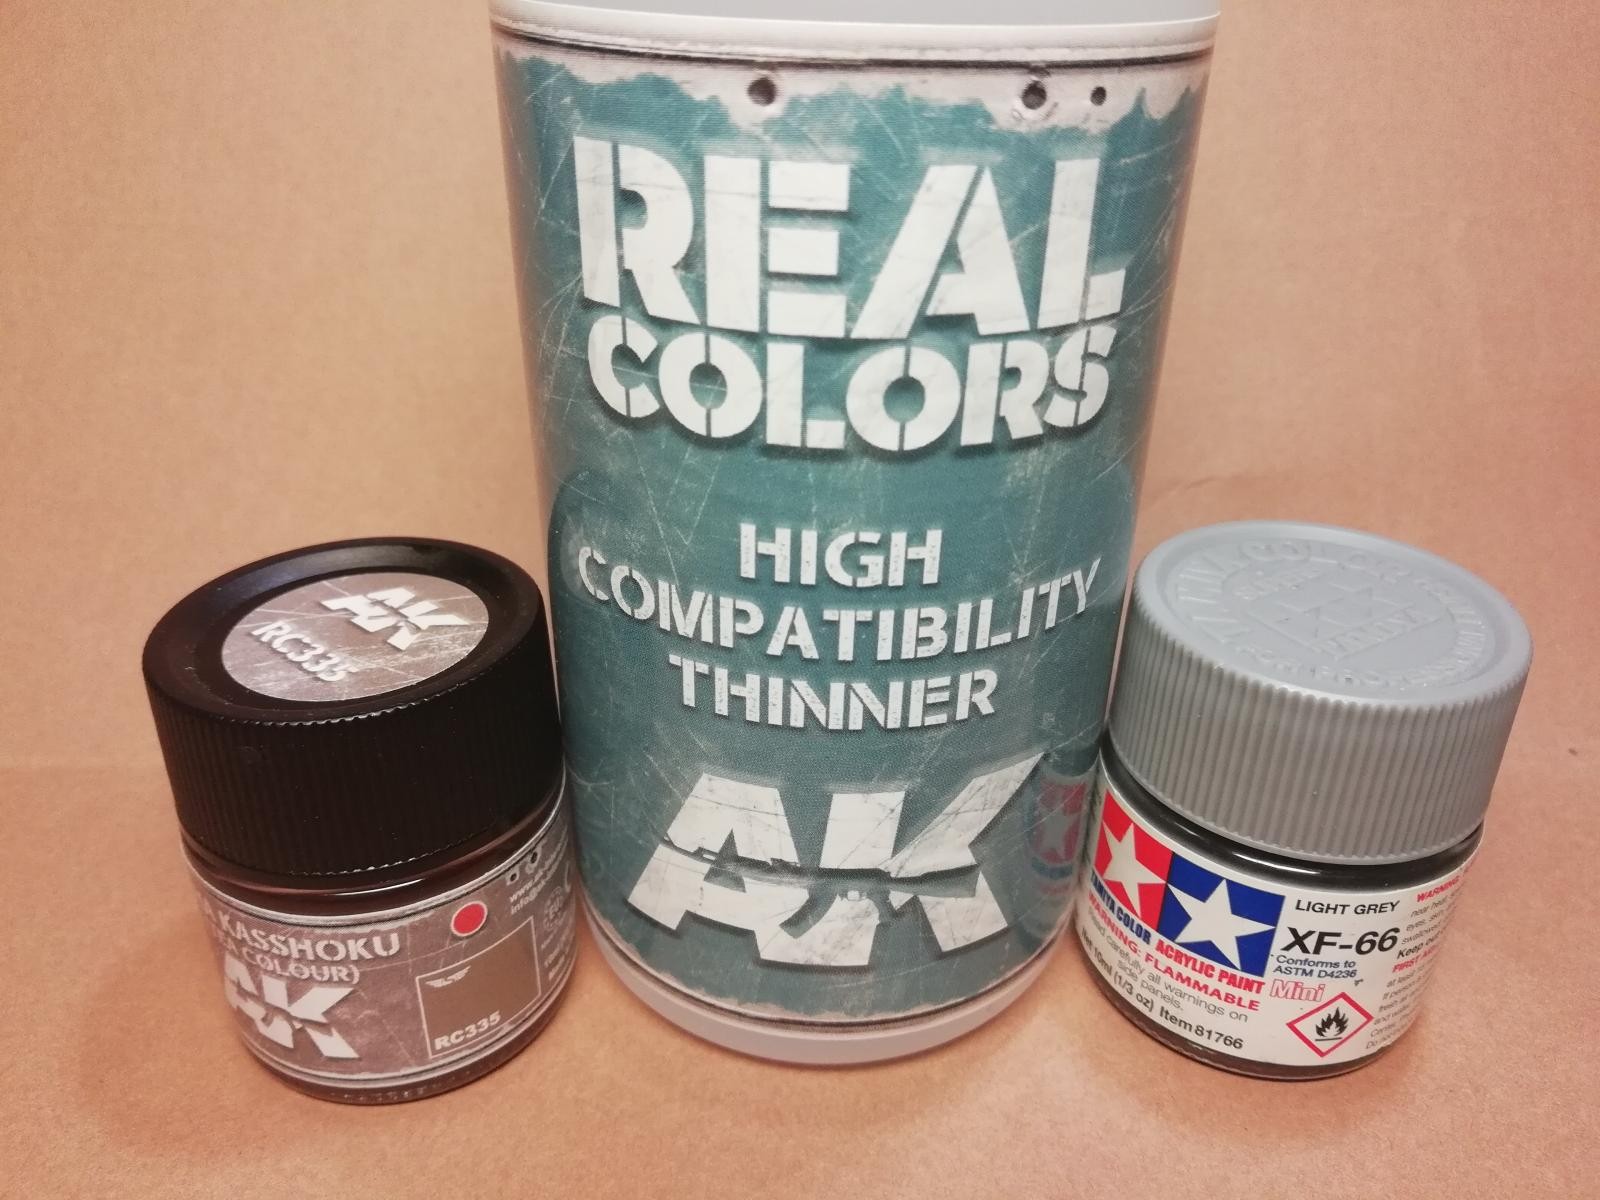 Can I use these 2 together? Tamiya lacquer thinner and AK Real